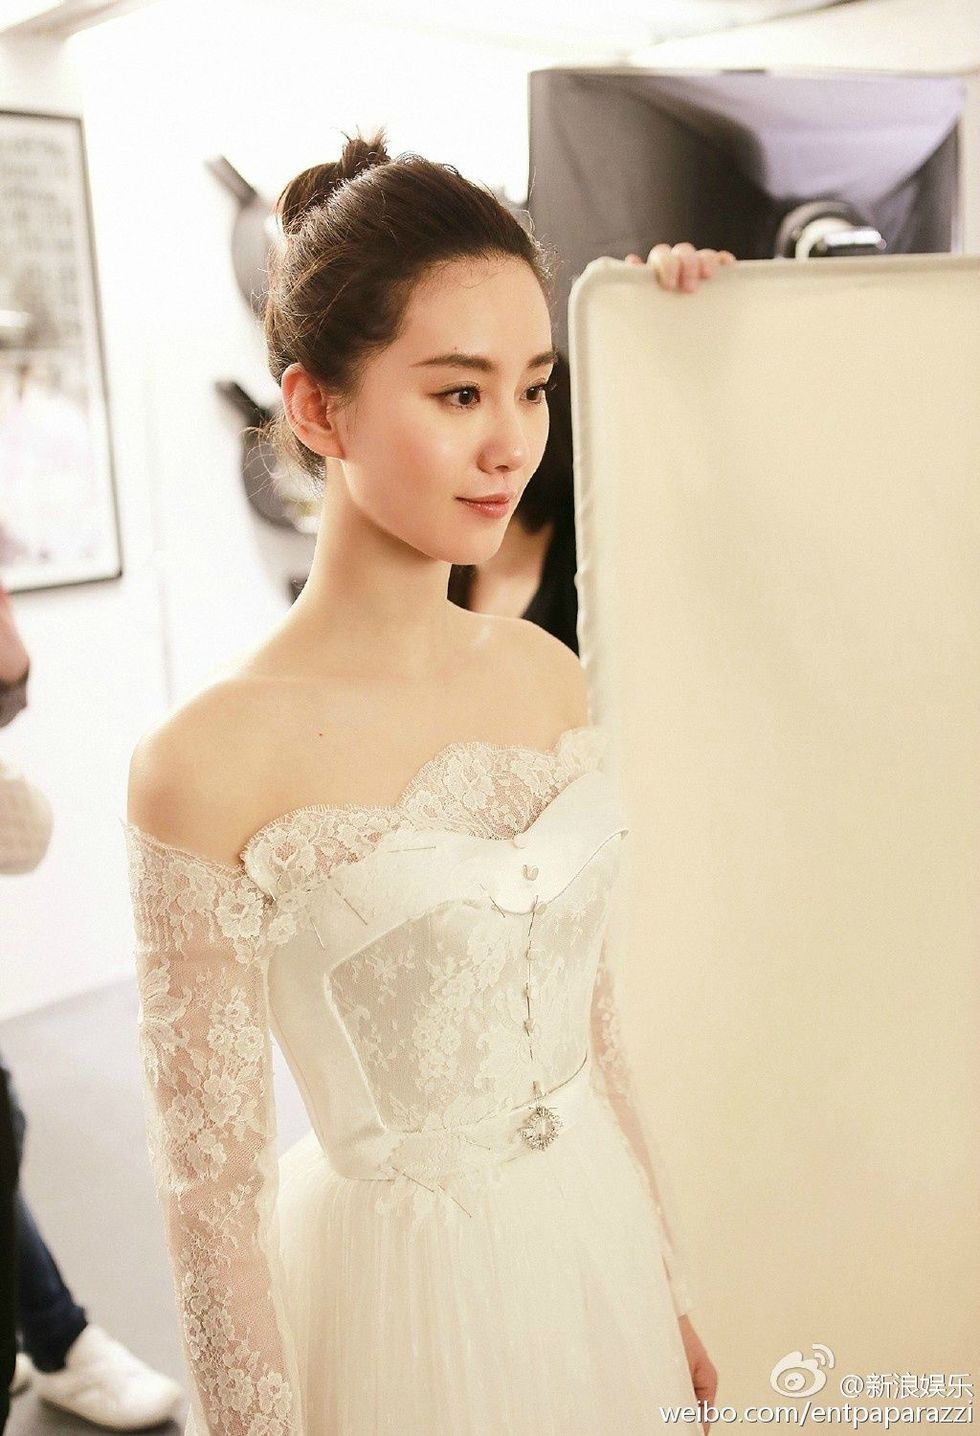 Hairstyle, Sleeve, Shoulder, Dress, Bridal clothing, Gown, Picture frame, Style, Strapless dress, Wedding dress, 